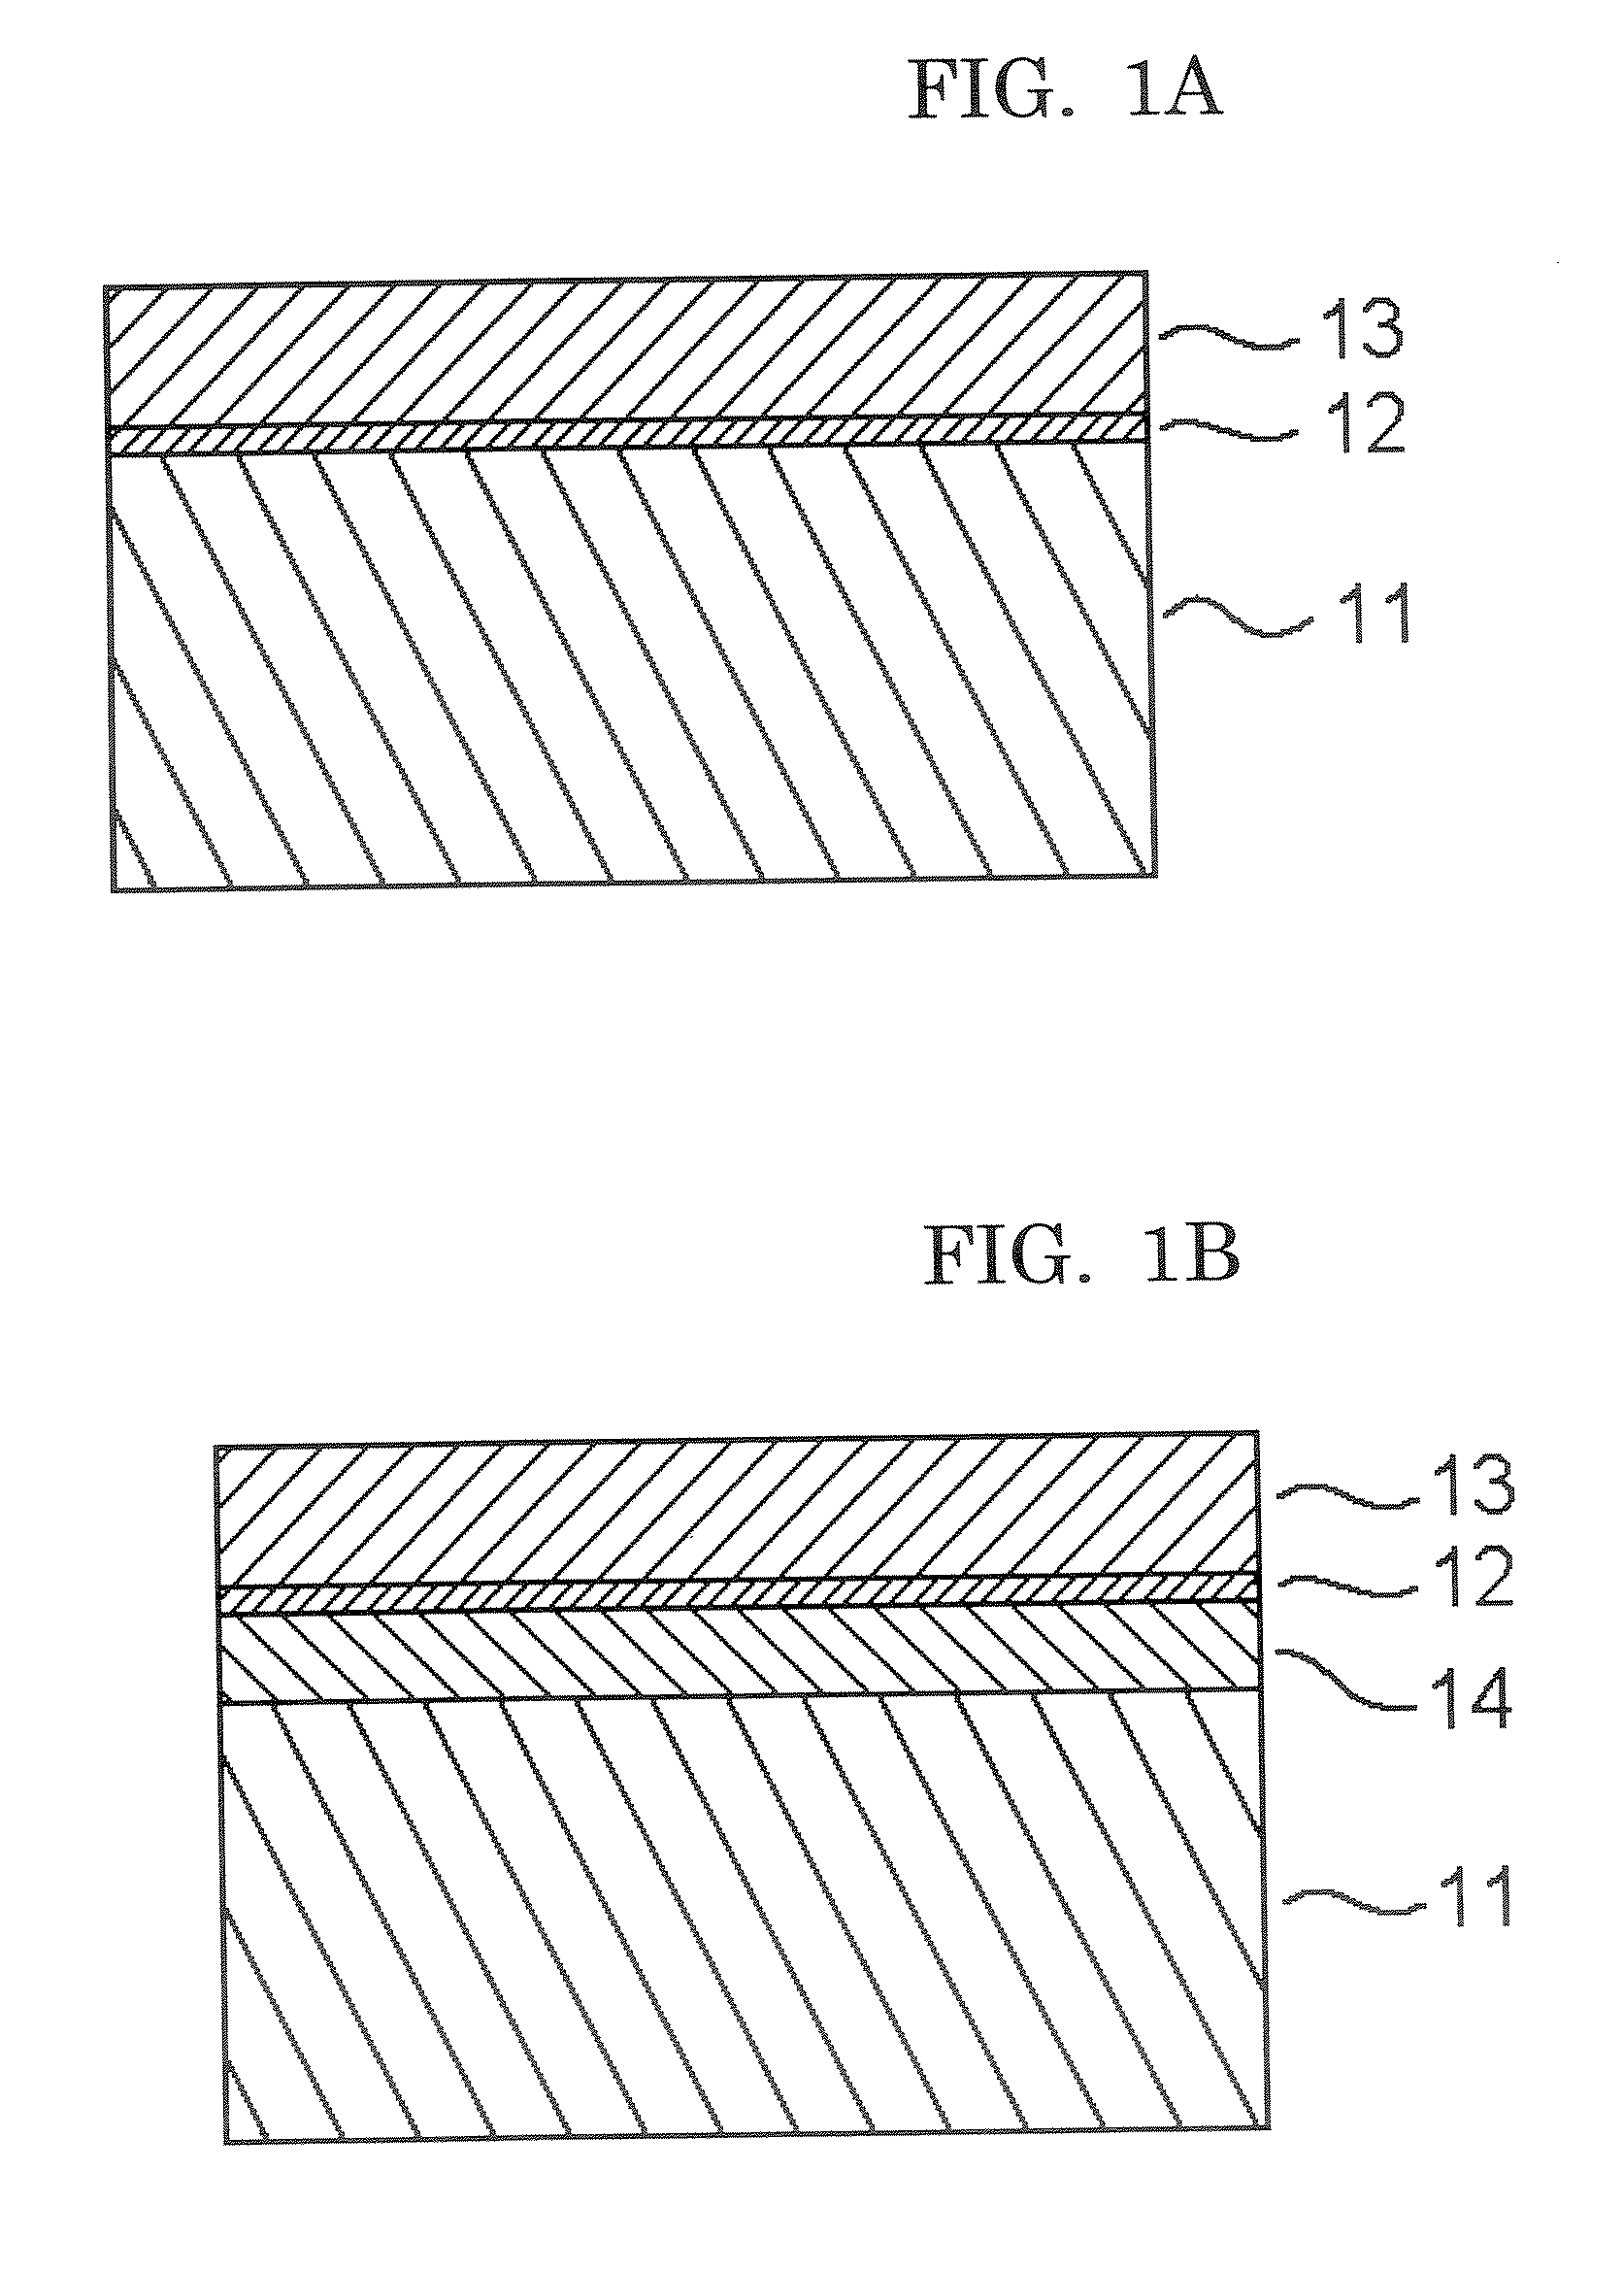 Method for evaluating electrophotographic photoconductor and the evaluation device, and method for reusing electrophotographic photoconductor